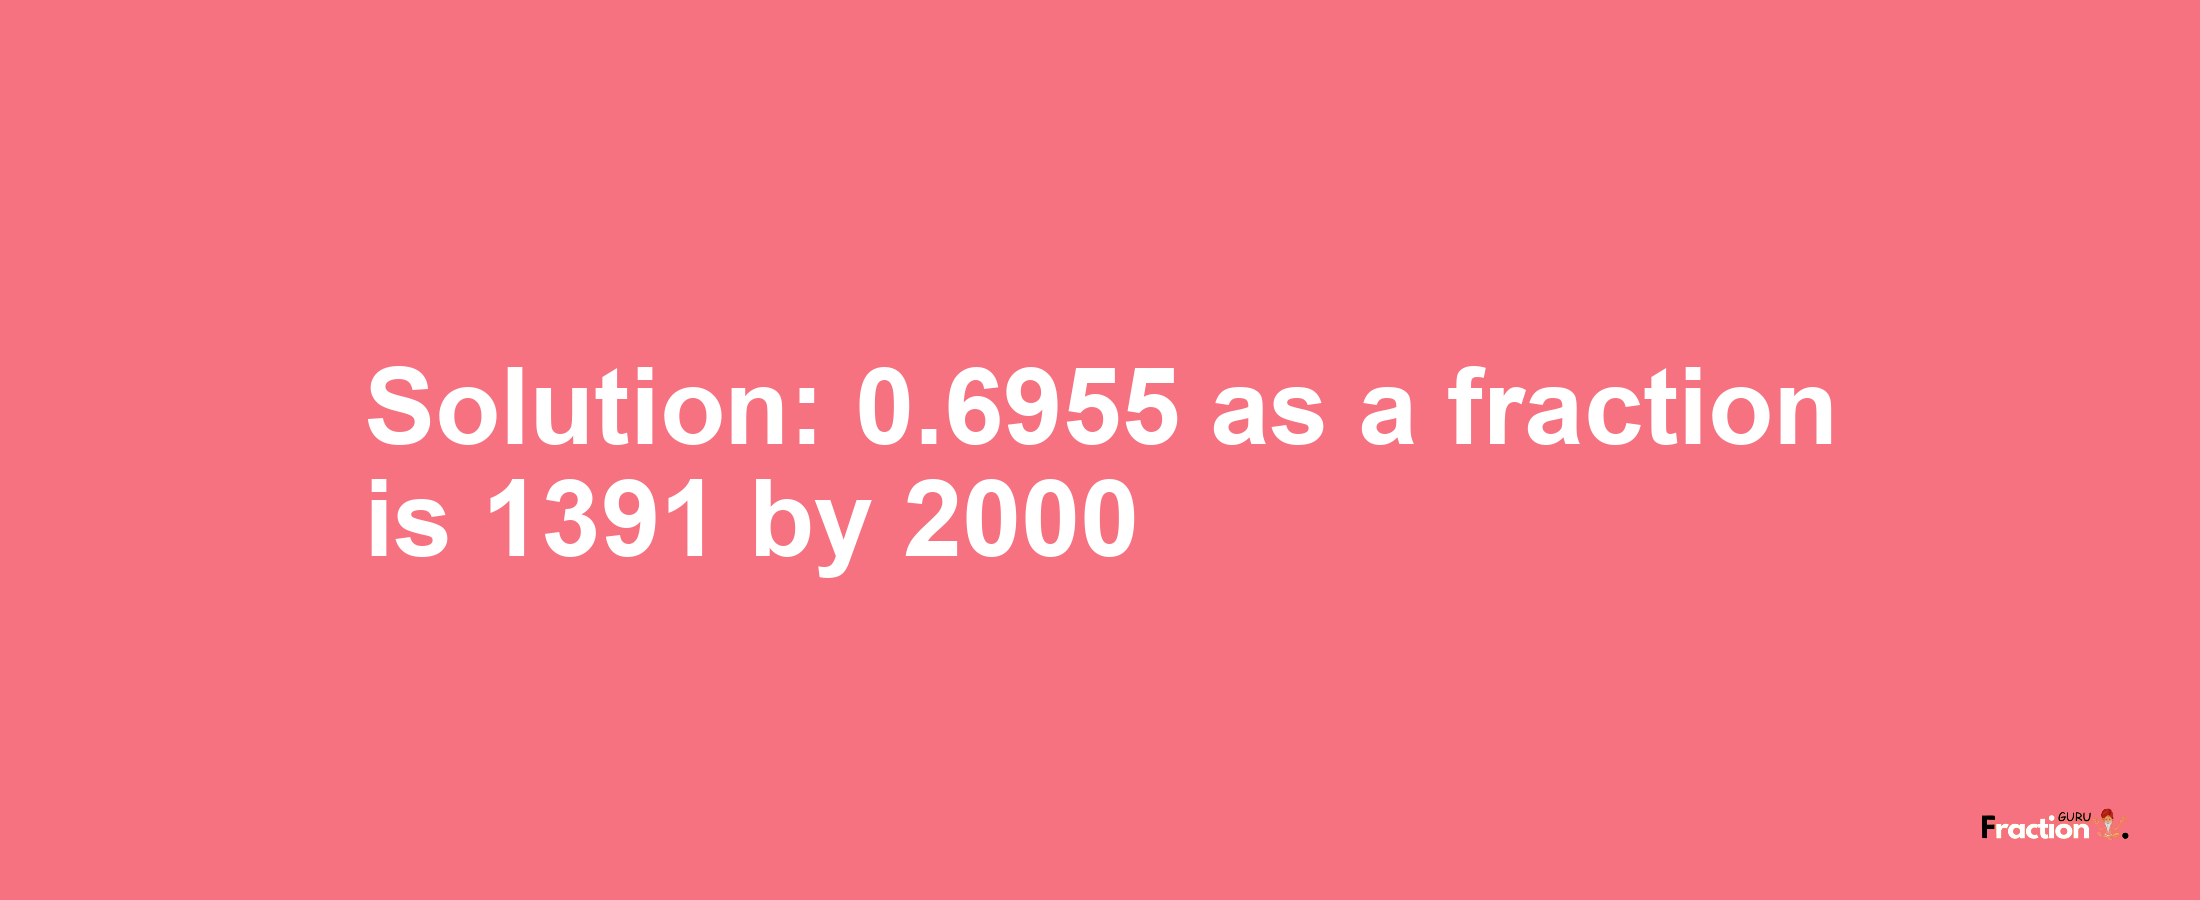 Solution:0.6955 as a fraction is 1391/2000